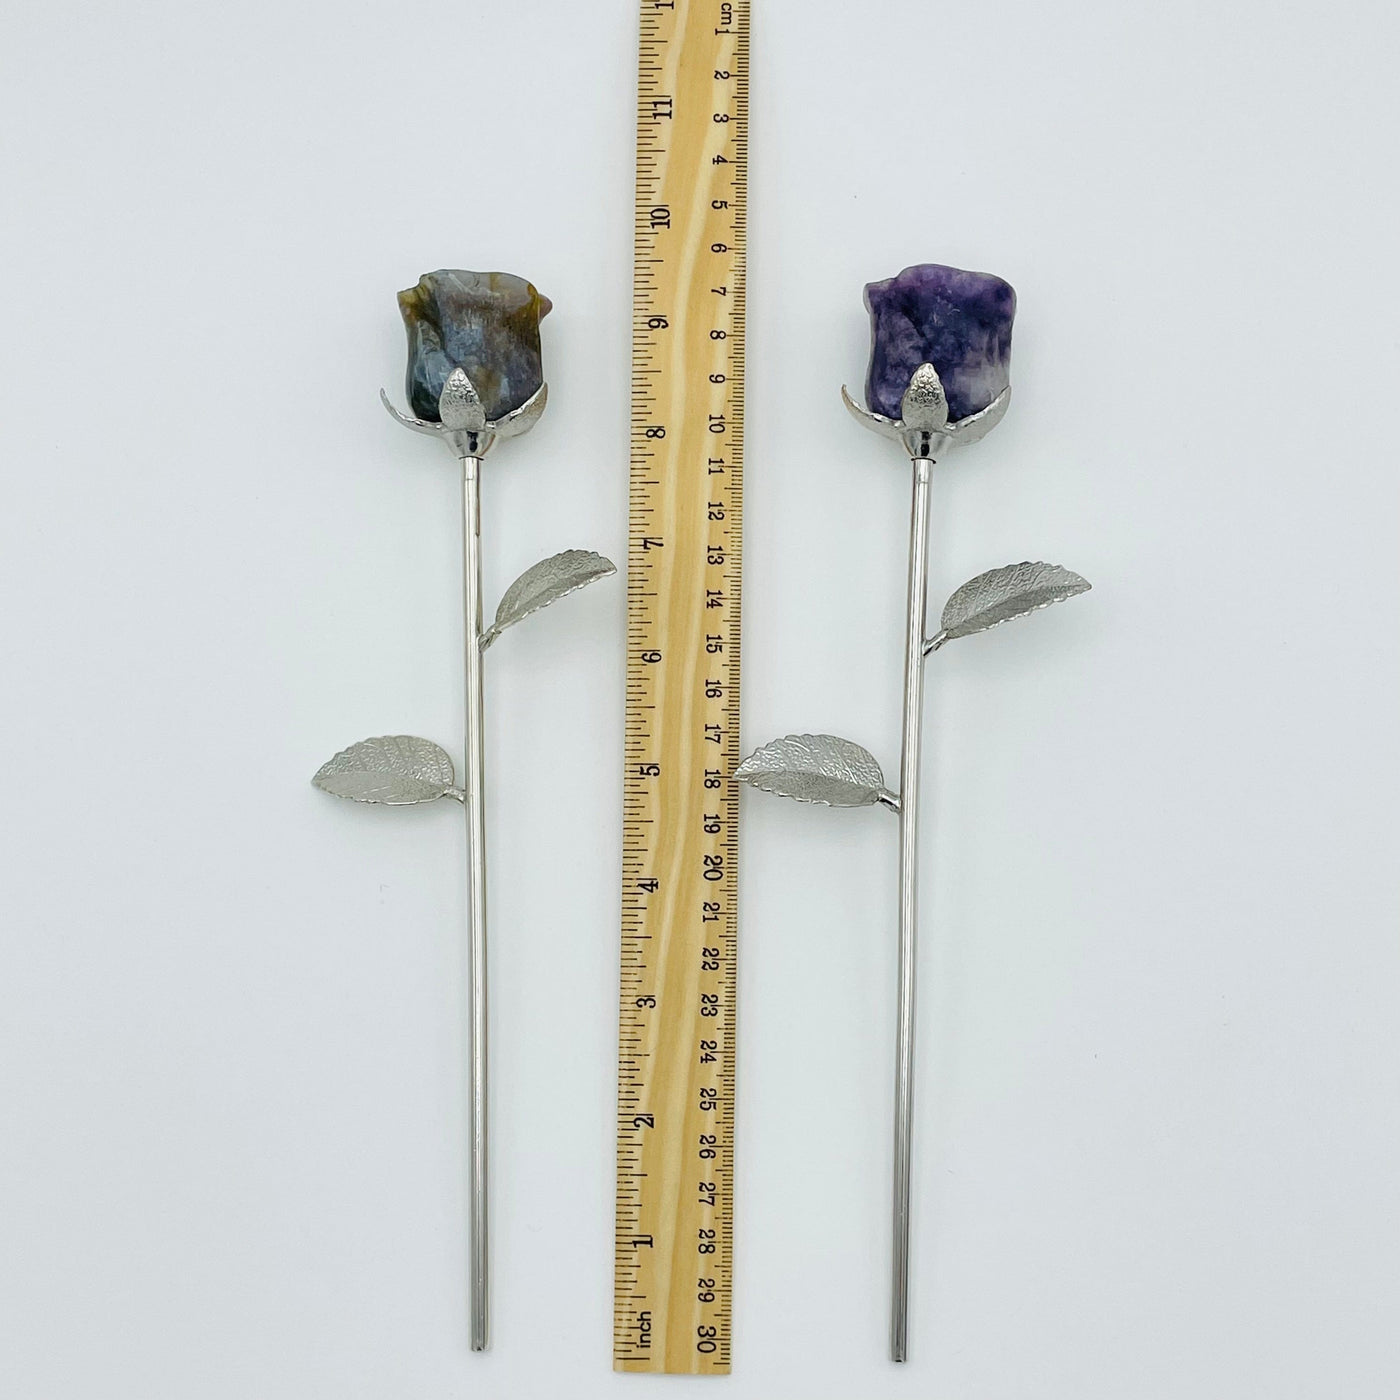 roses displayed next to a ruler for size reference 